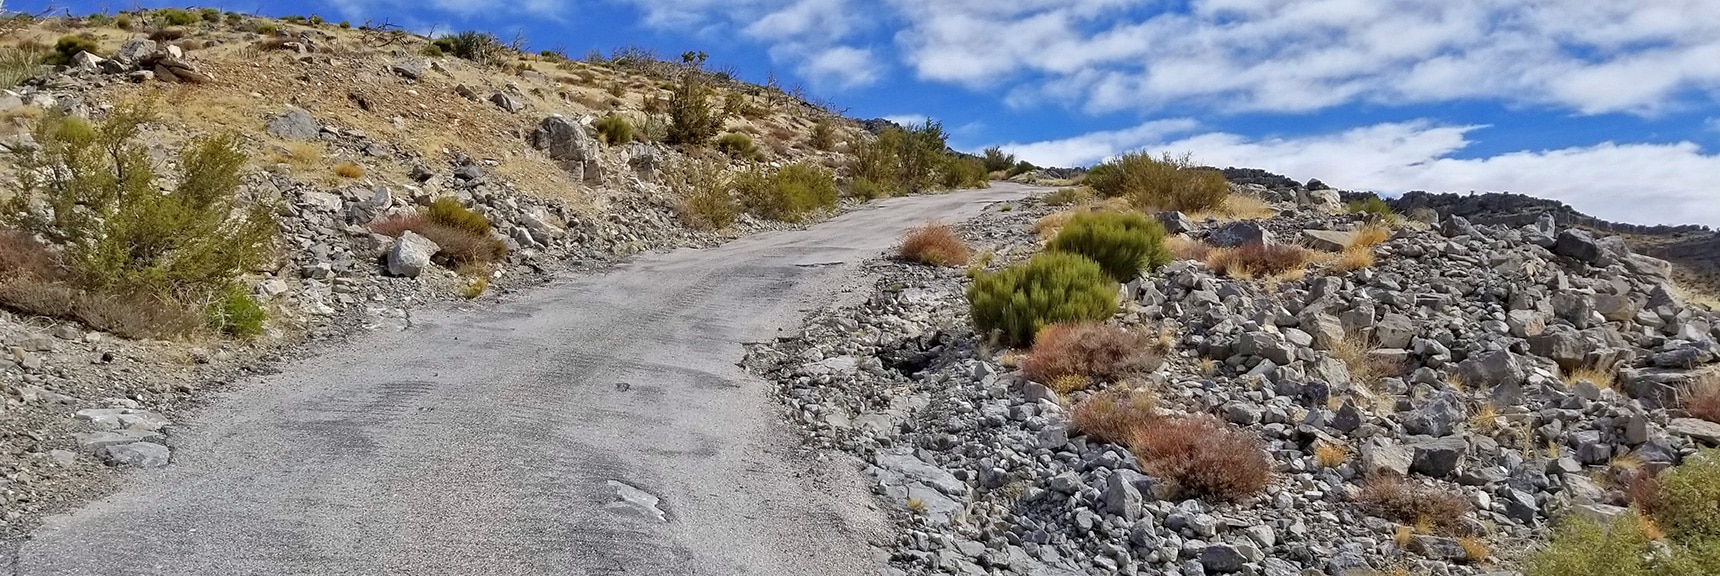 Most Steep Incline Stretches on Potosi Mountain Road are Paved | Potosi Mountain Spring Mountains Nevada